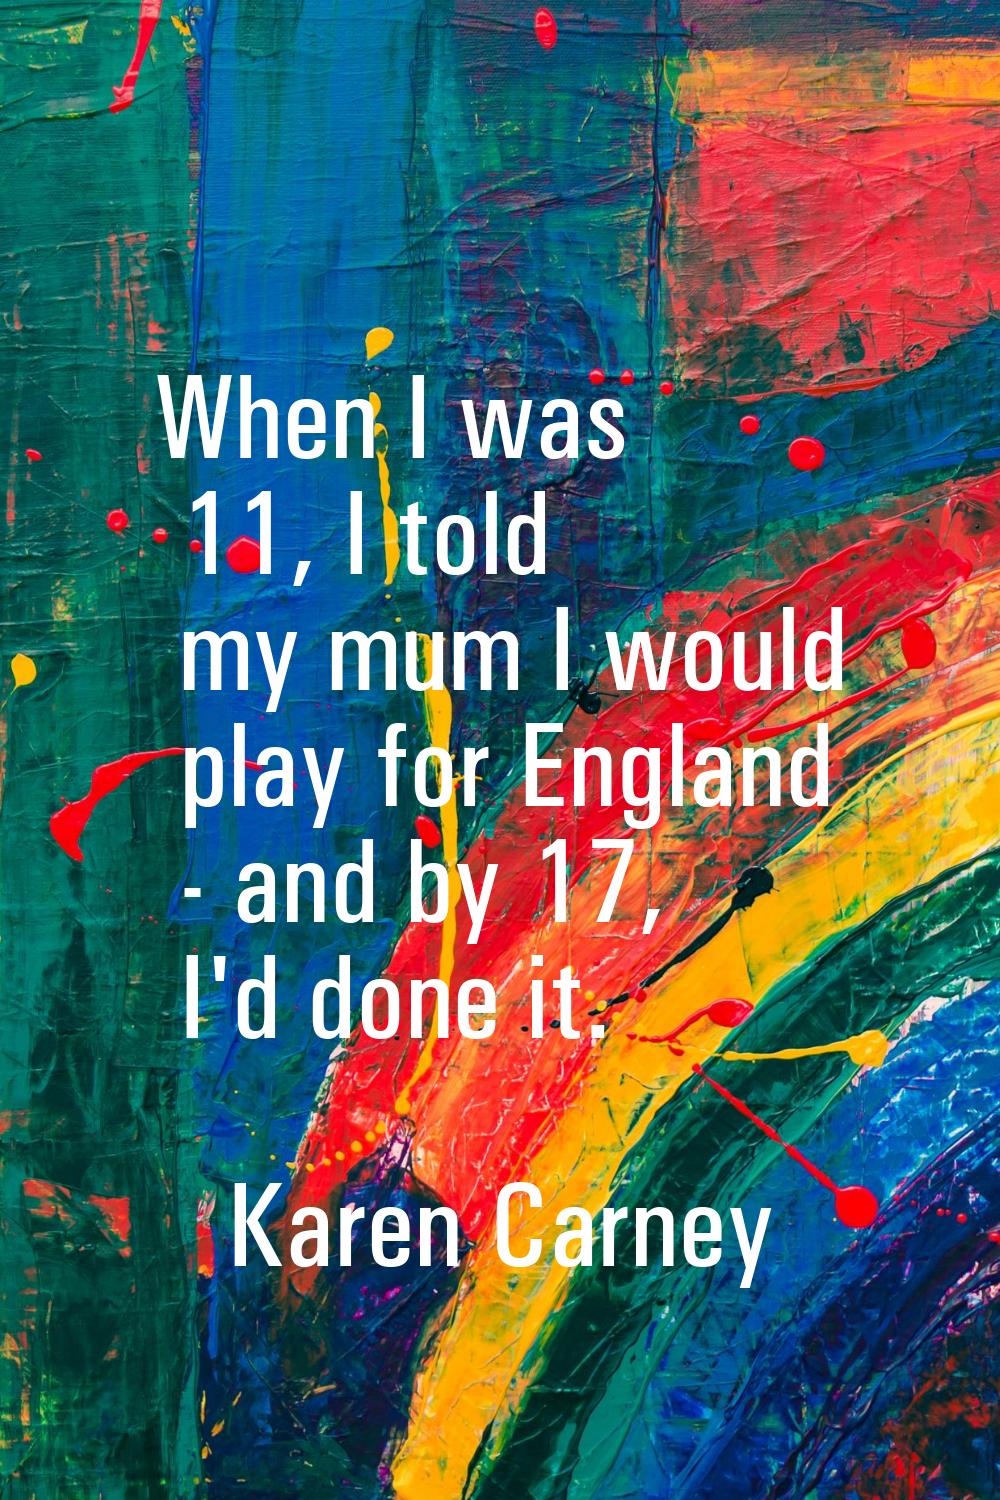 When I was 11, I told my mum I would play for England - and by 17, I'd done it.